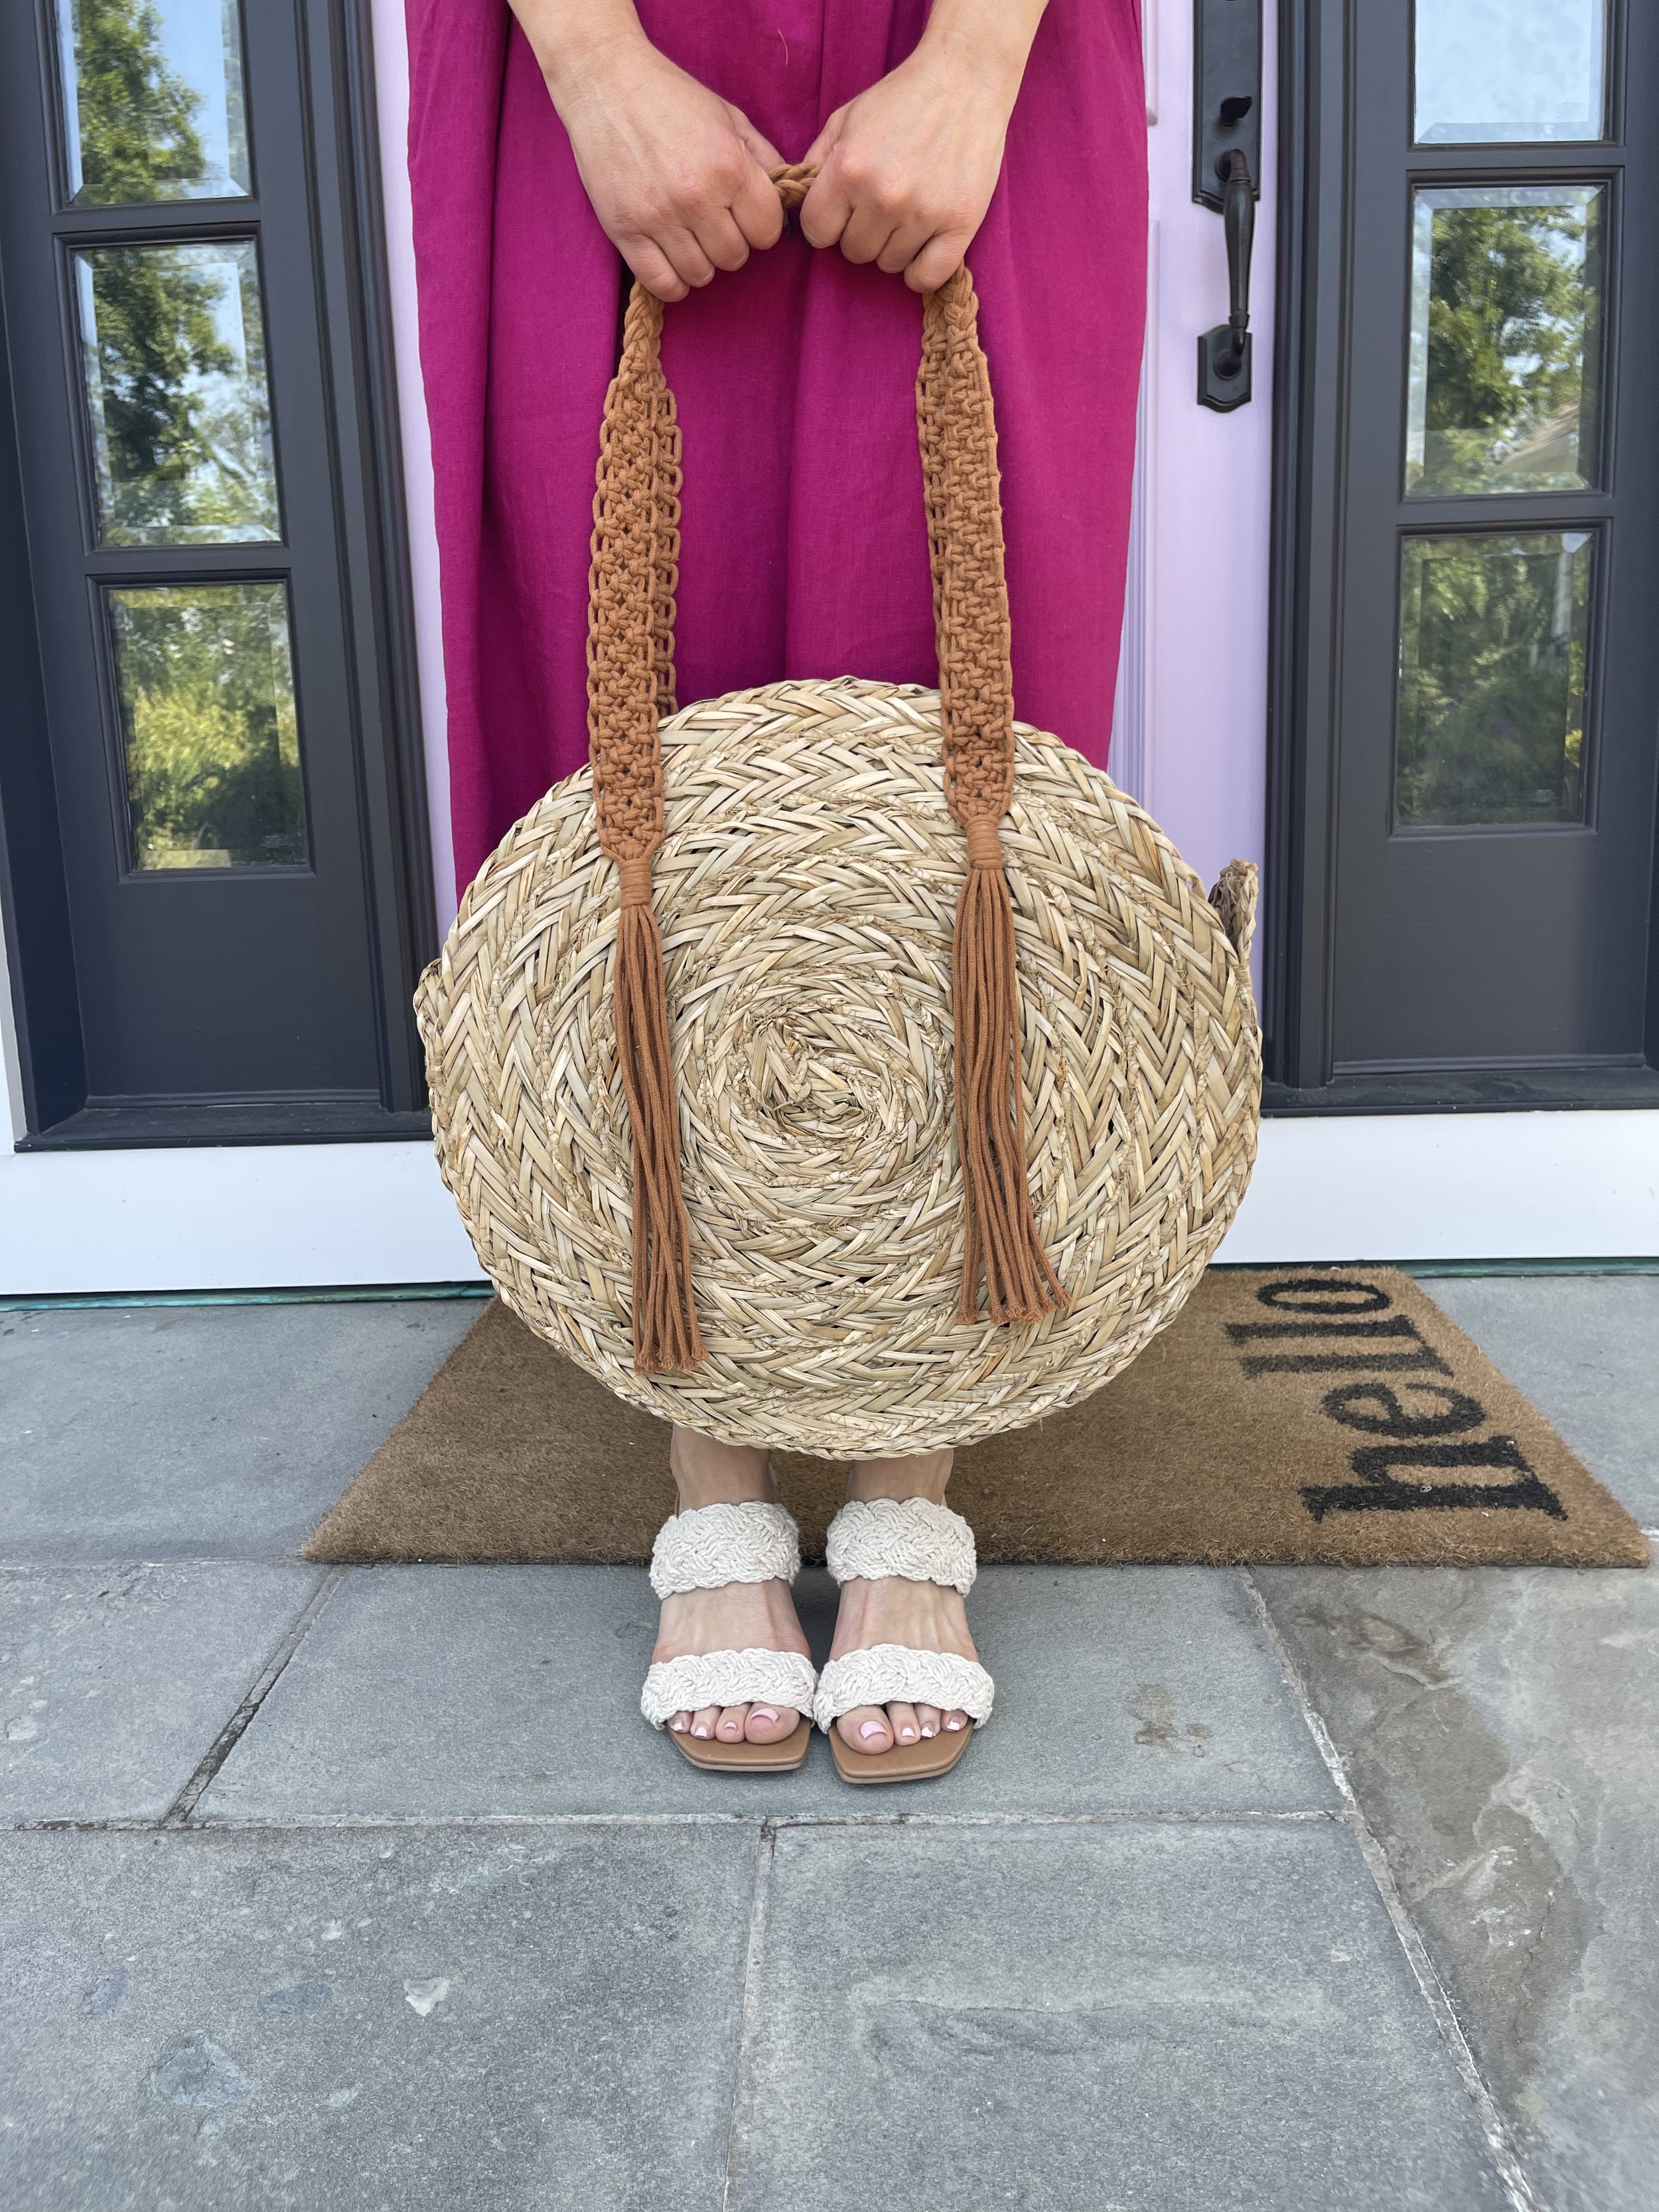 This Summery Straw Bag Shoppers Love Is Just $35 at Target